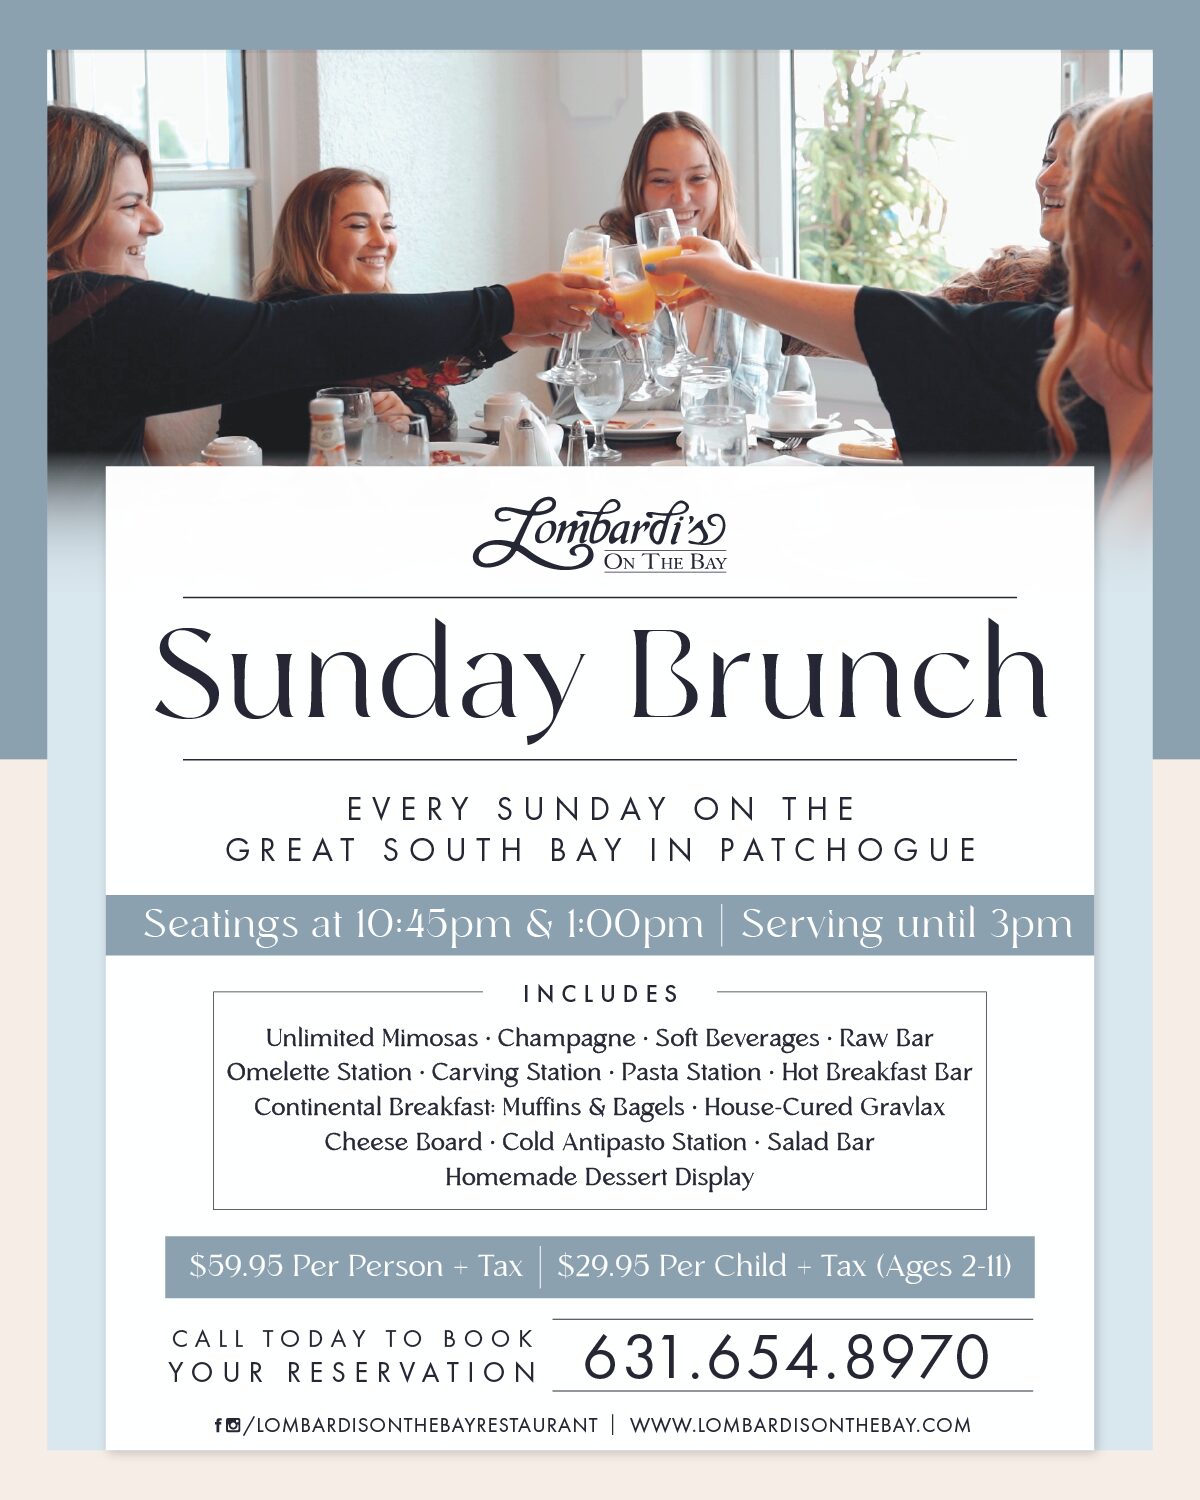 Lombardi's on the Bay Sunday Brunch, every Sunday with seating at 10:45 AM and 1 PM